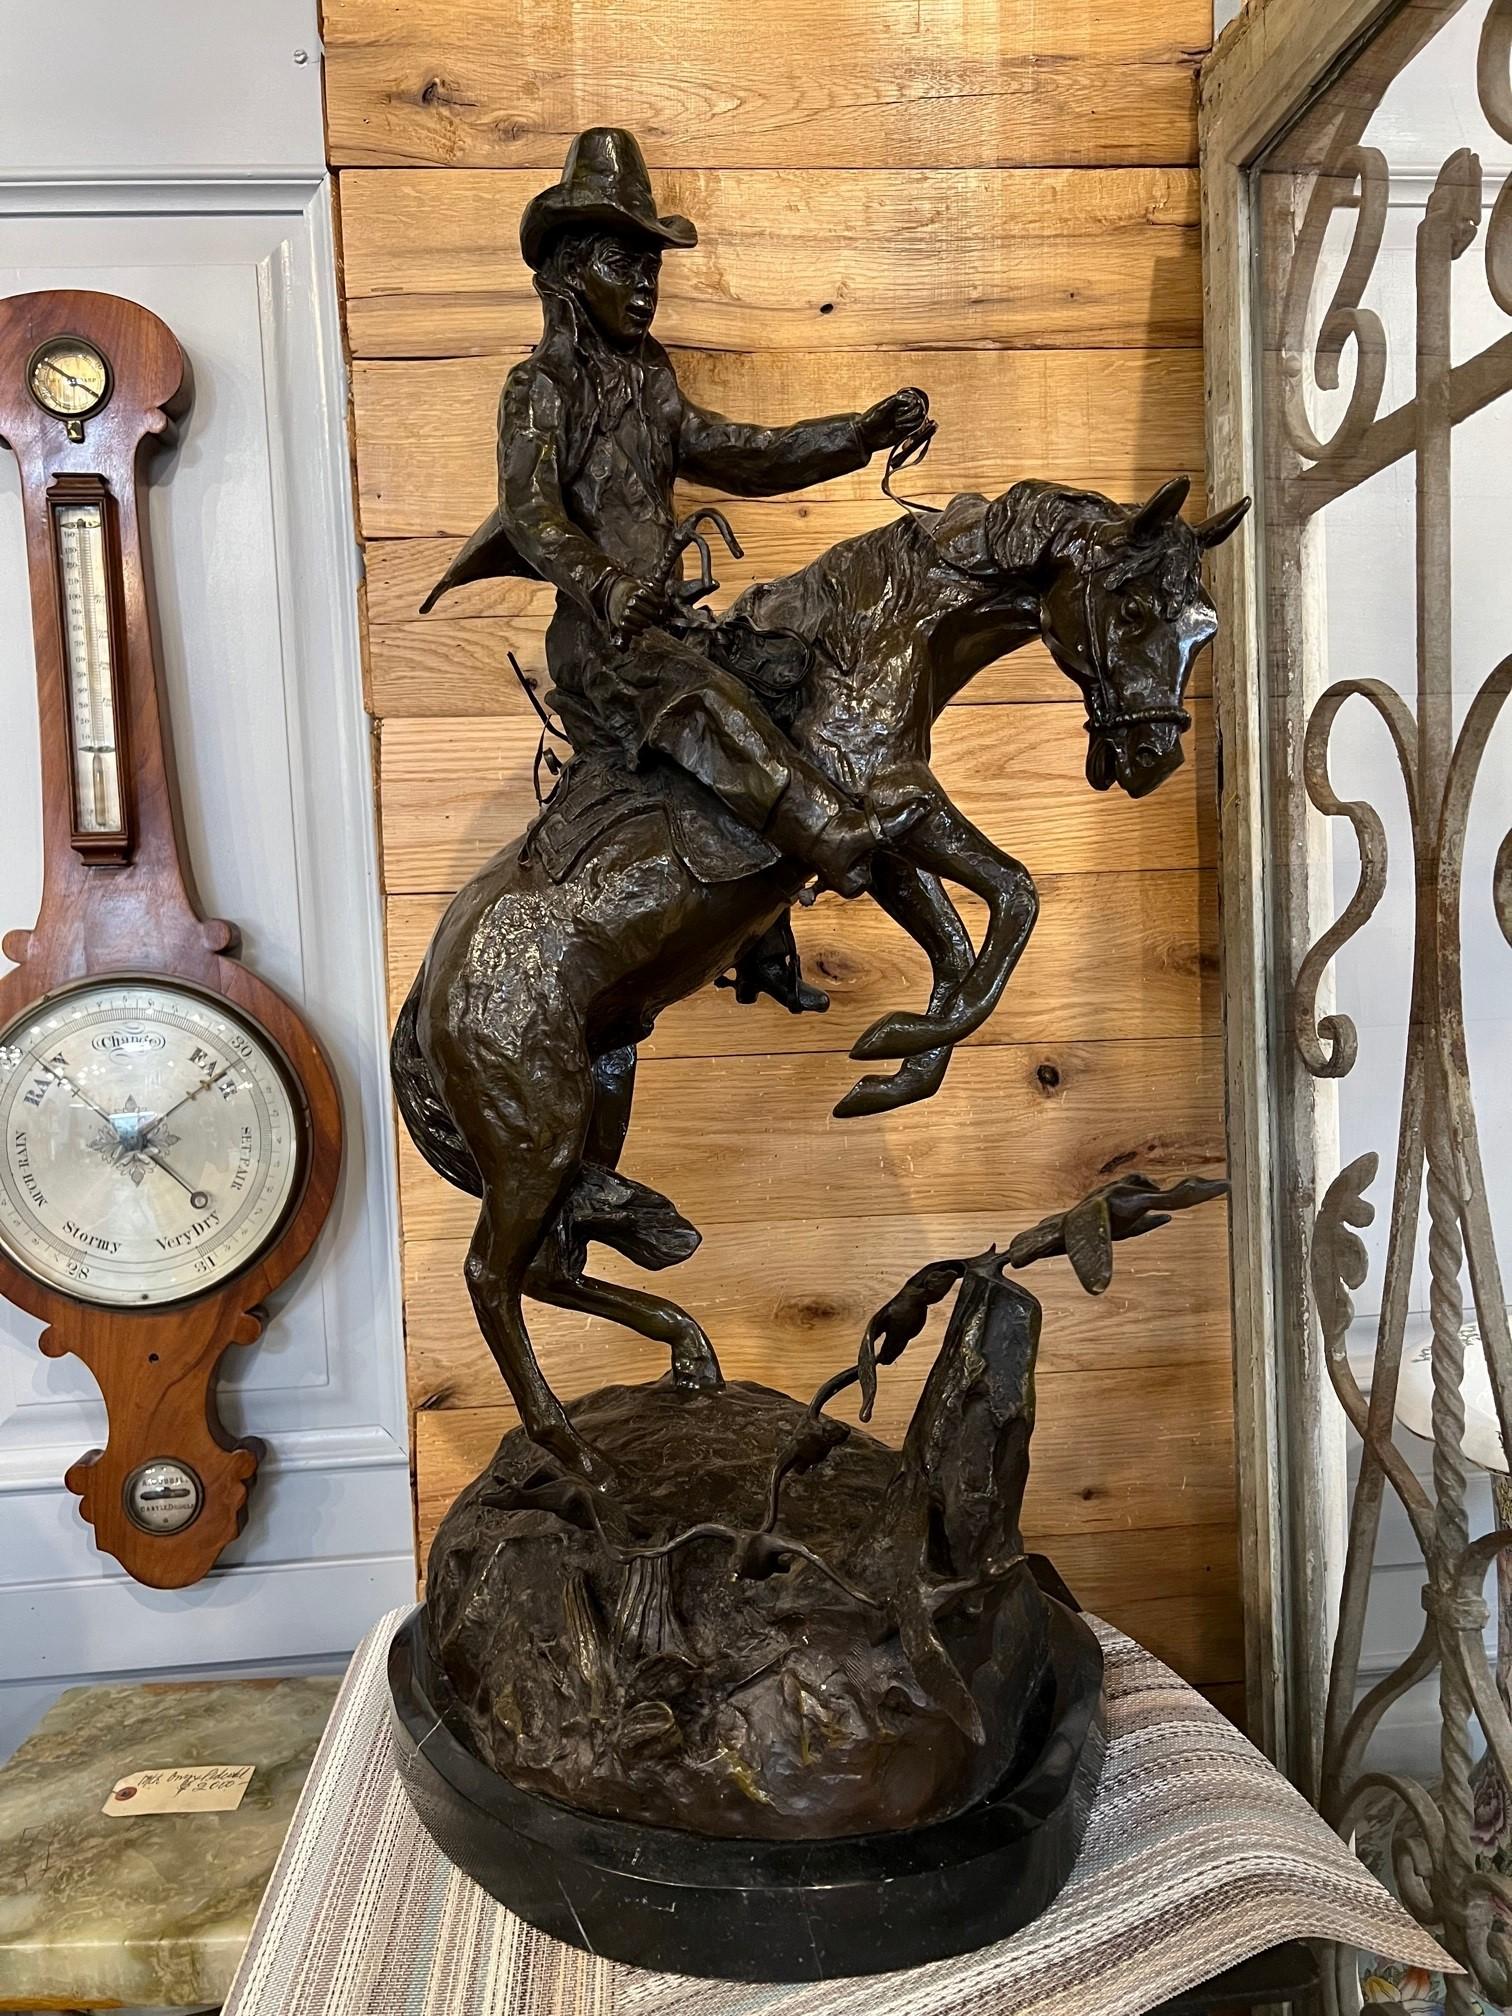 Late 20th century bronze cowboy on a rearing horse signed Jim Davidson. This is a good looking piece with the cowboy on a rearing horse and birds in flight from the ground. Most likely from the late 1980s when the reproduction bronzes were very good